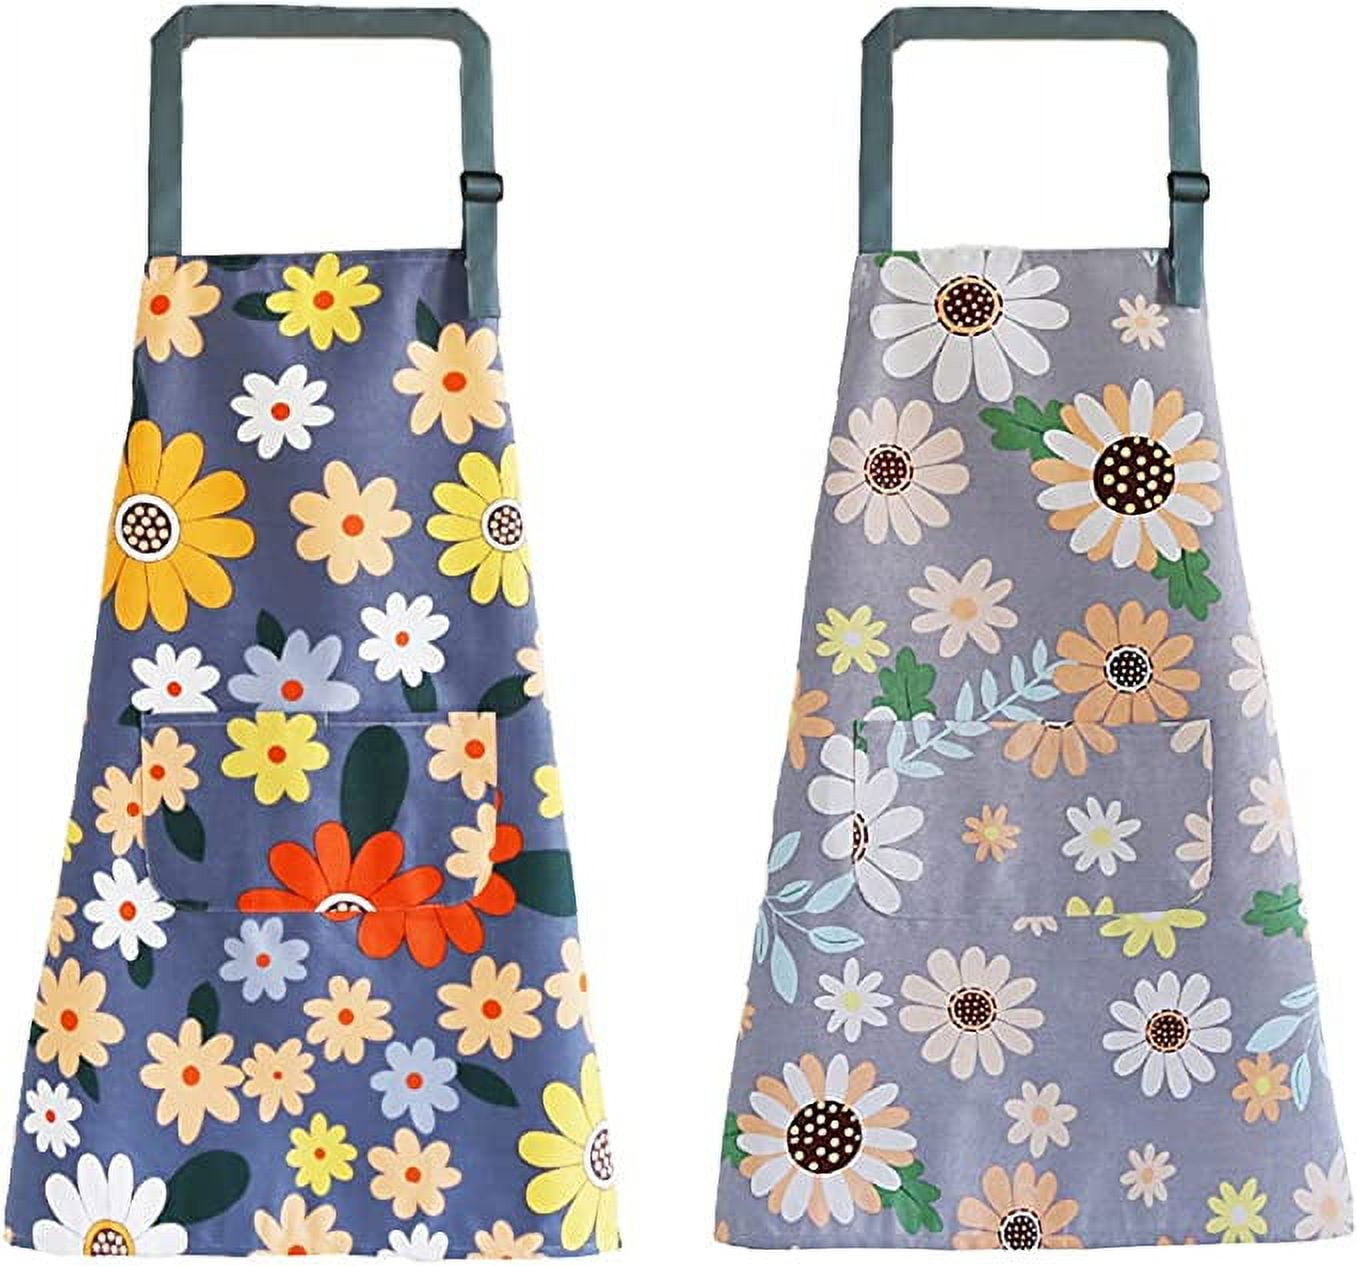 2 Pack Kitchen Apron for Women, Floral Aprons with Large Pockets ...